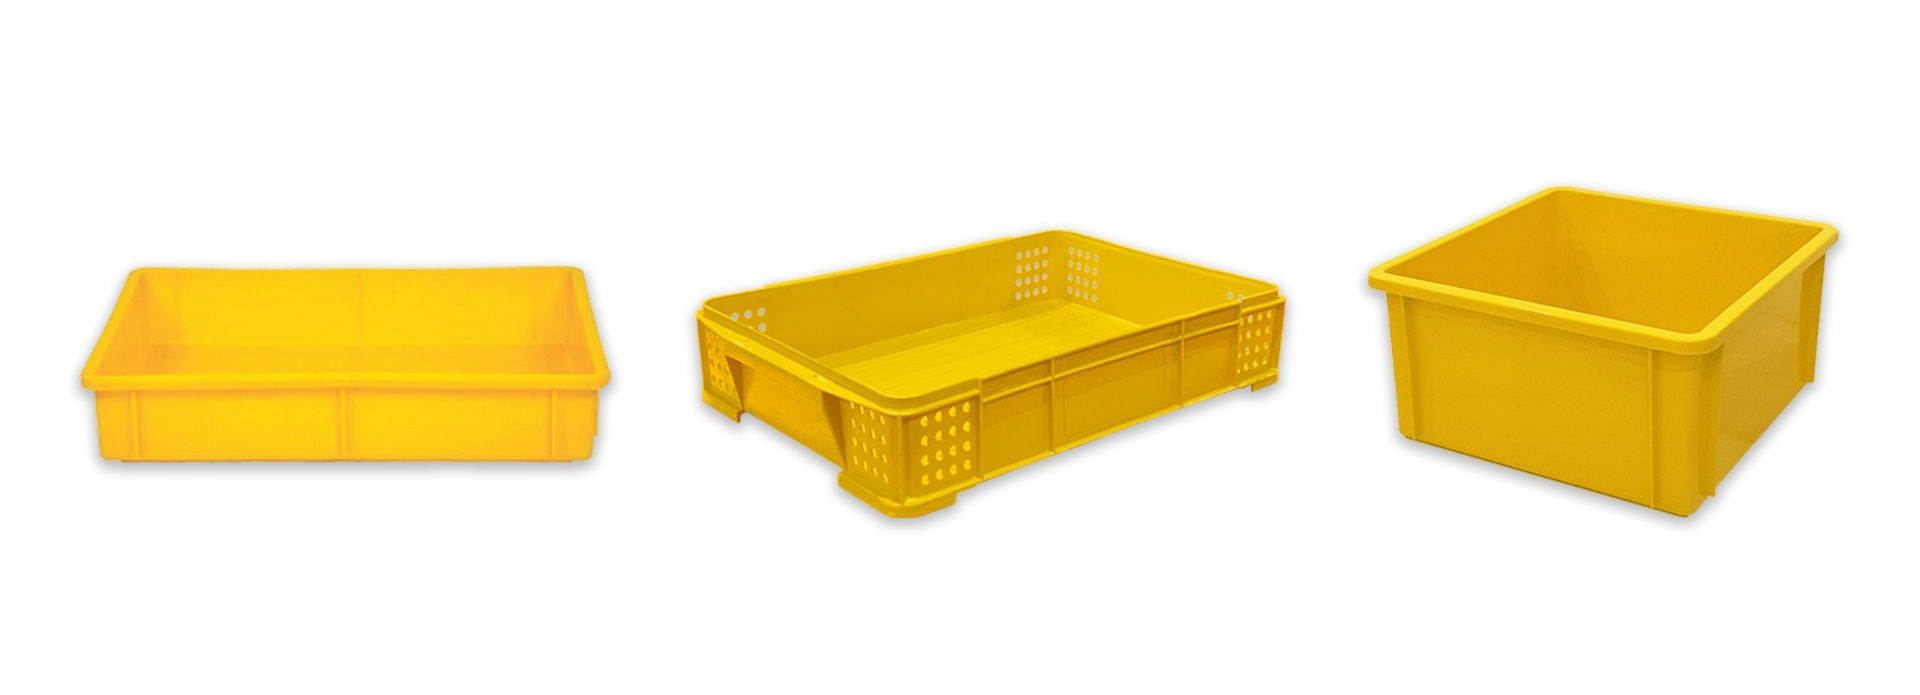 Bakery Trays and Containers